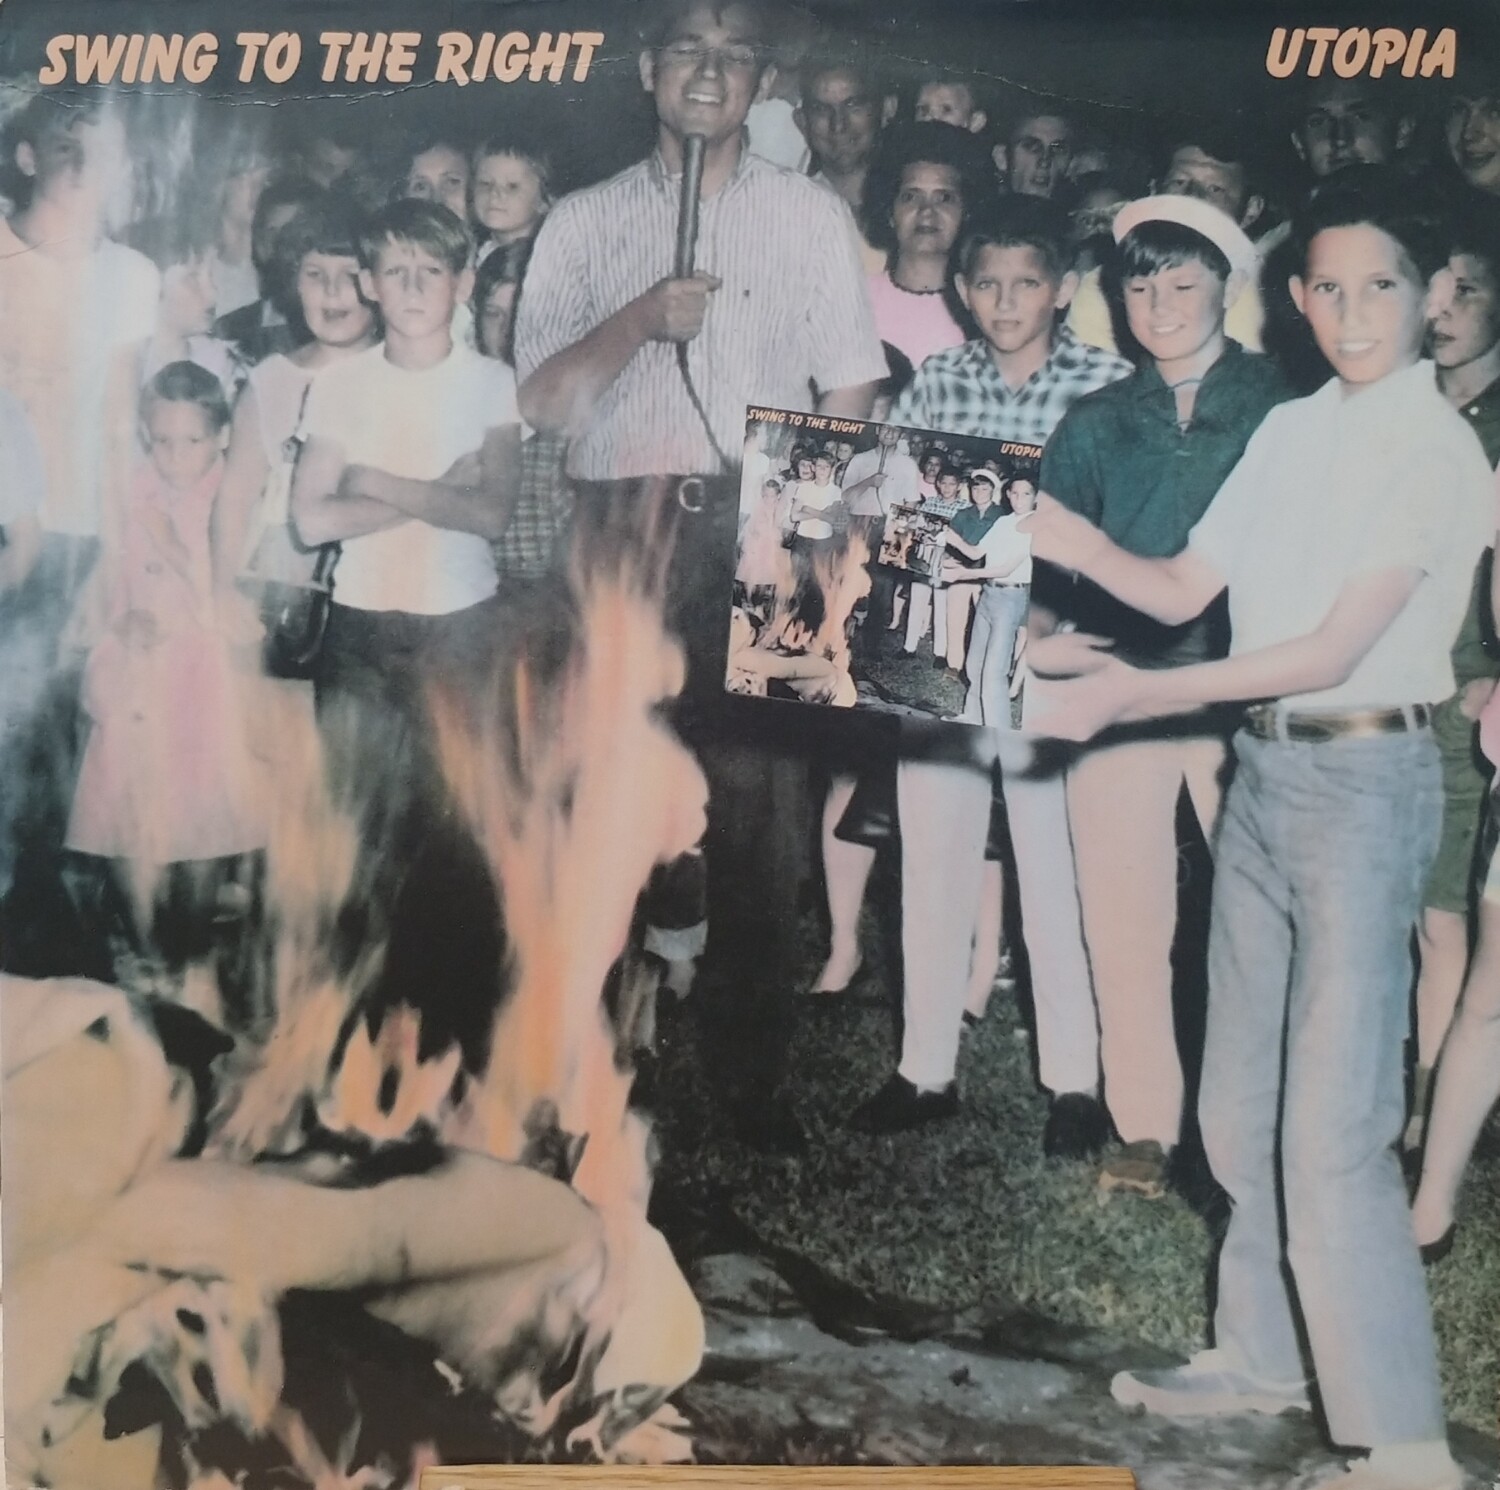 Utopia - Swing to the right